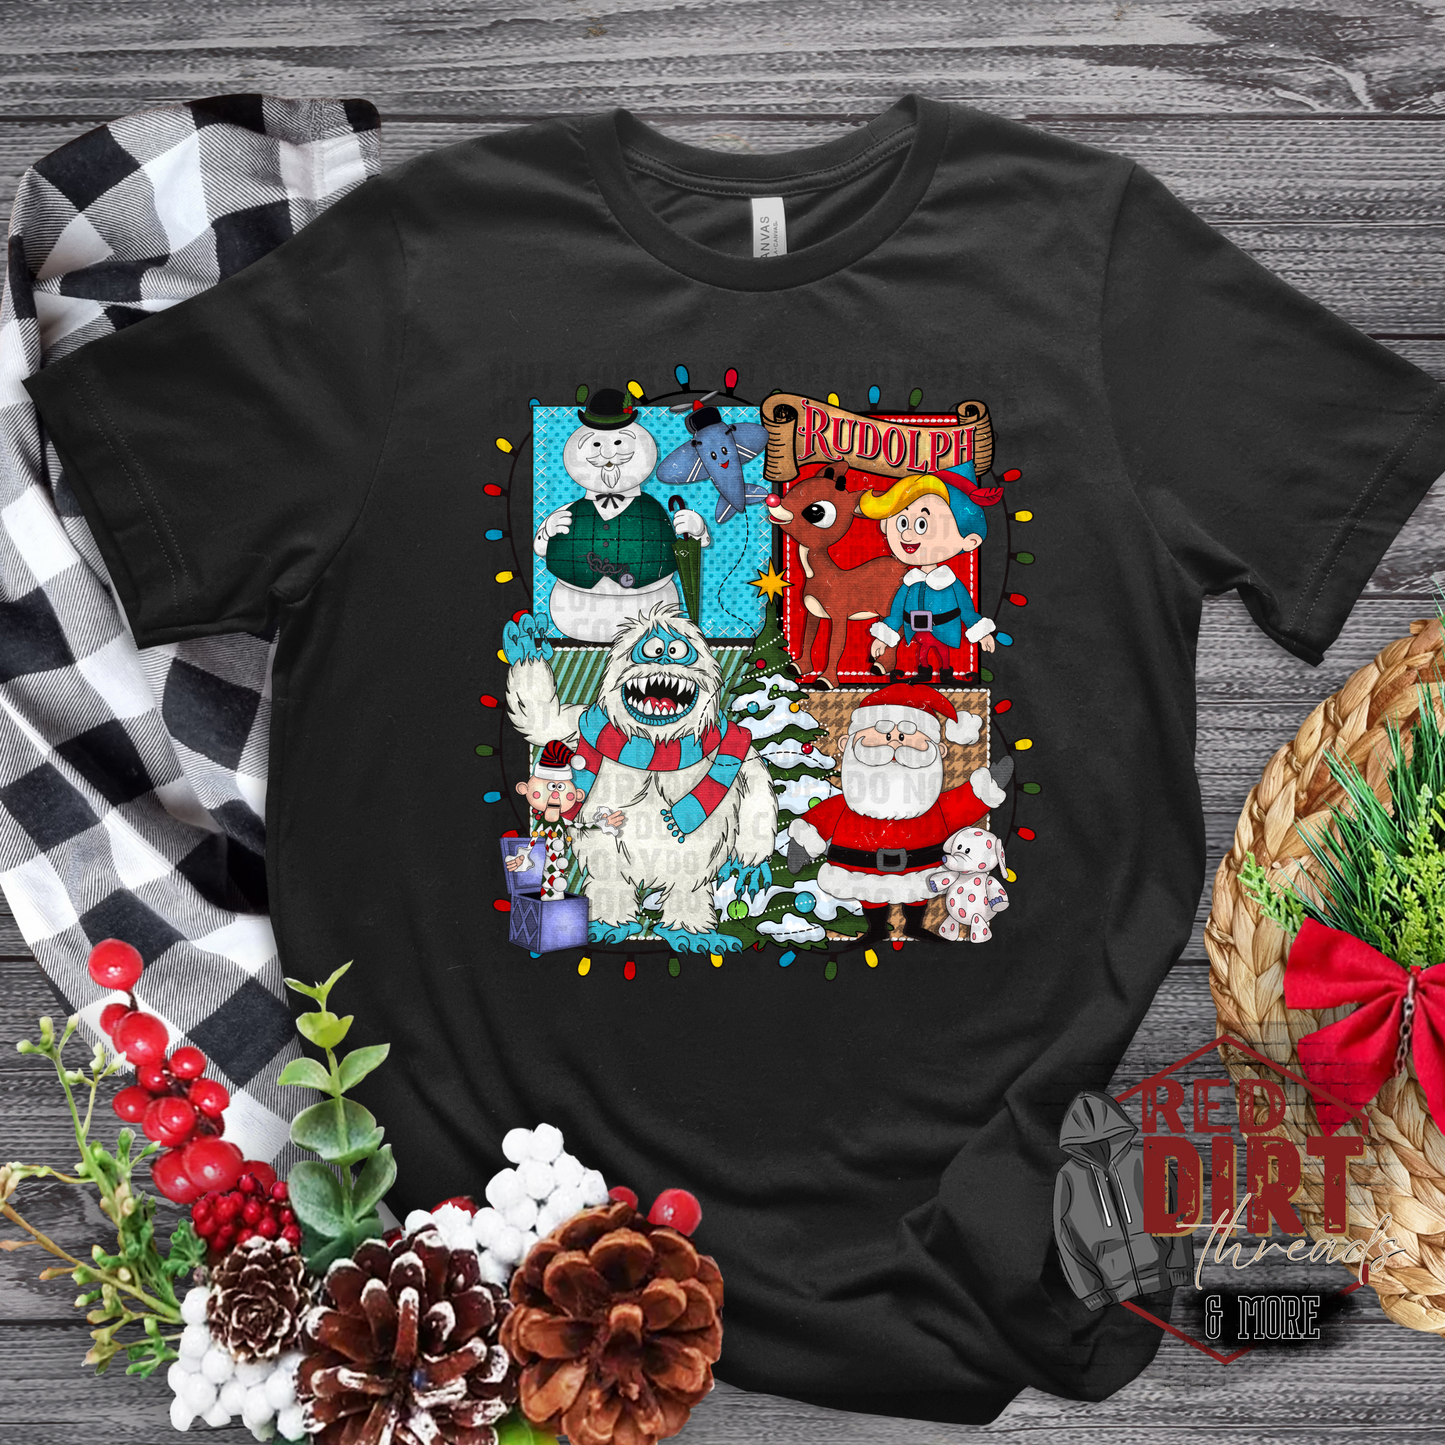 Christmas Deer With A Red Nose T-Shirt | Vintage Christmas Movie Shirt | Fast Shipping | Super Soft Shirts for Women/Kid's